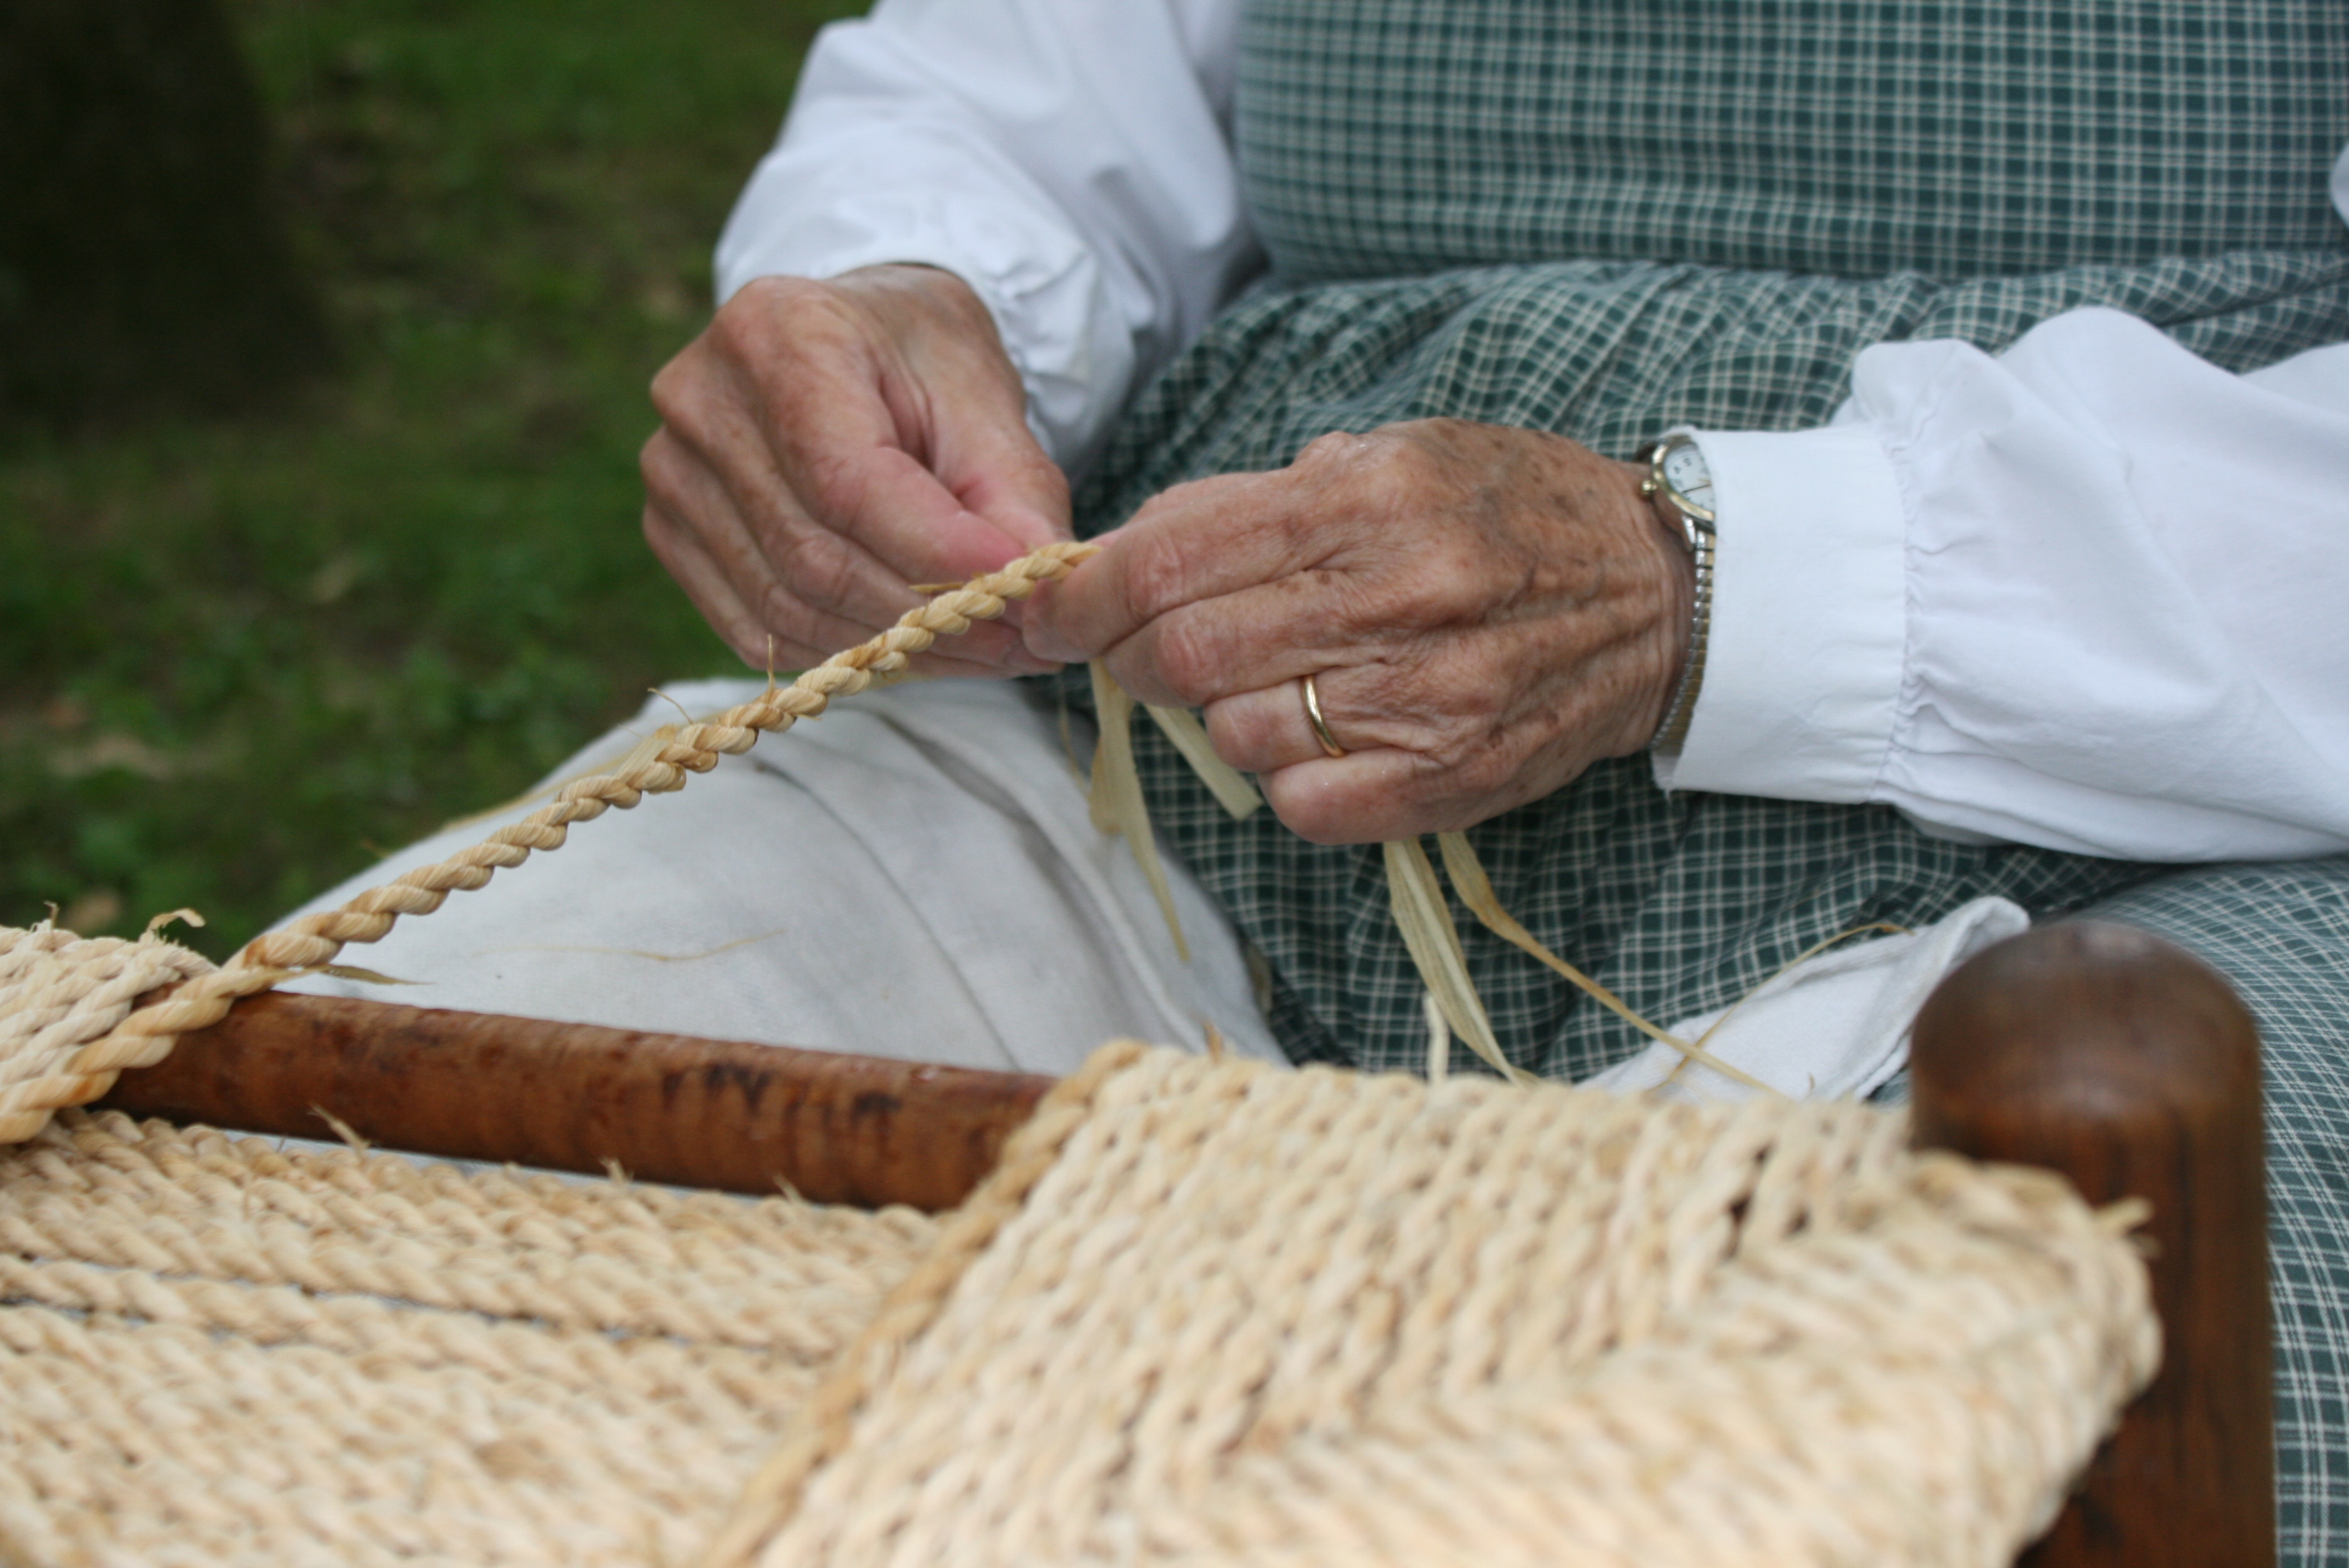 Chair caning at Heritage Day Event